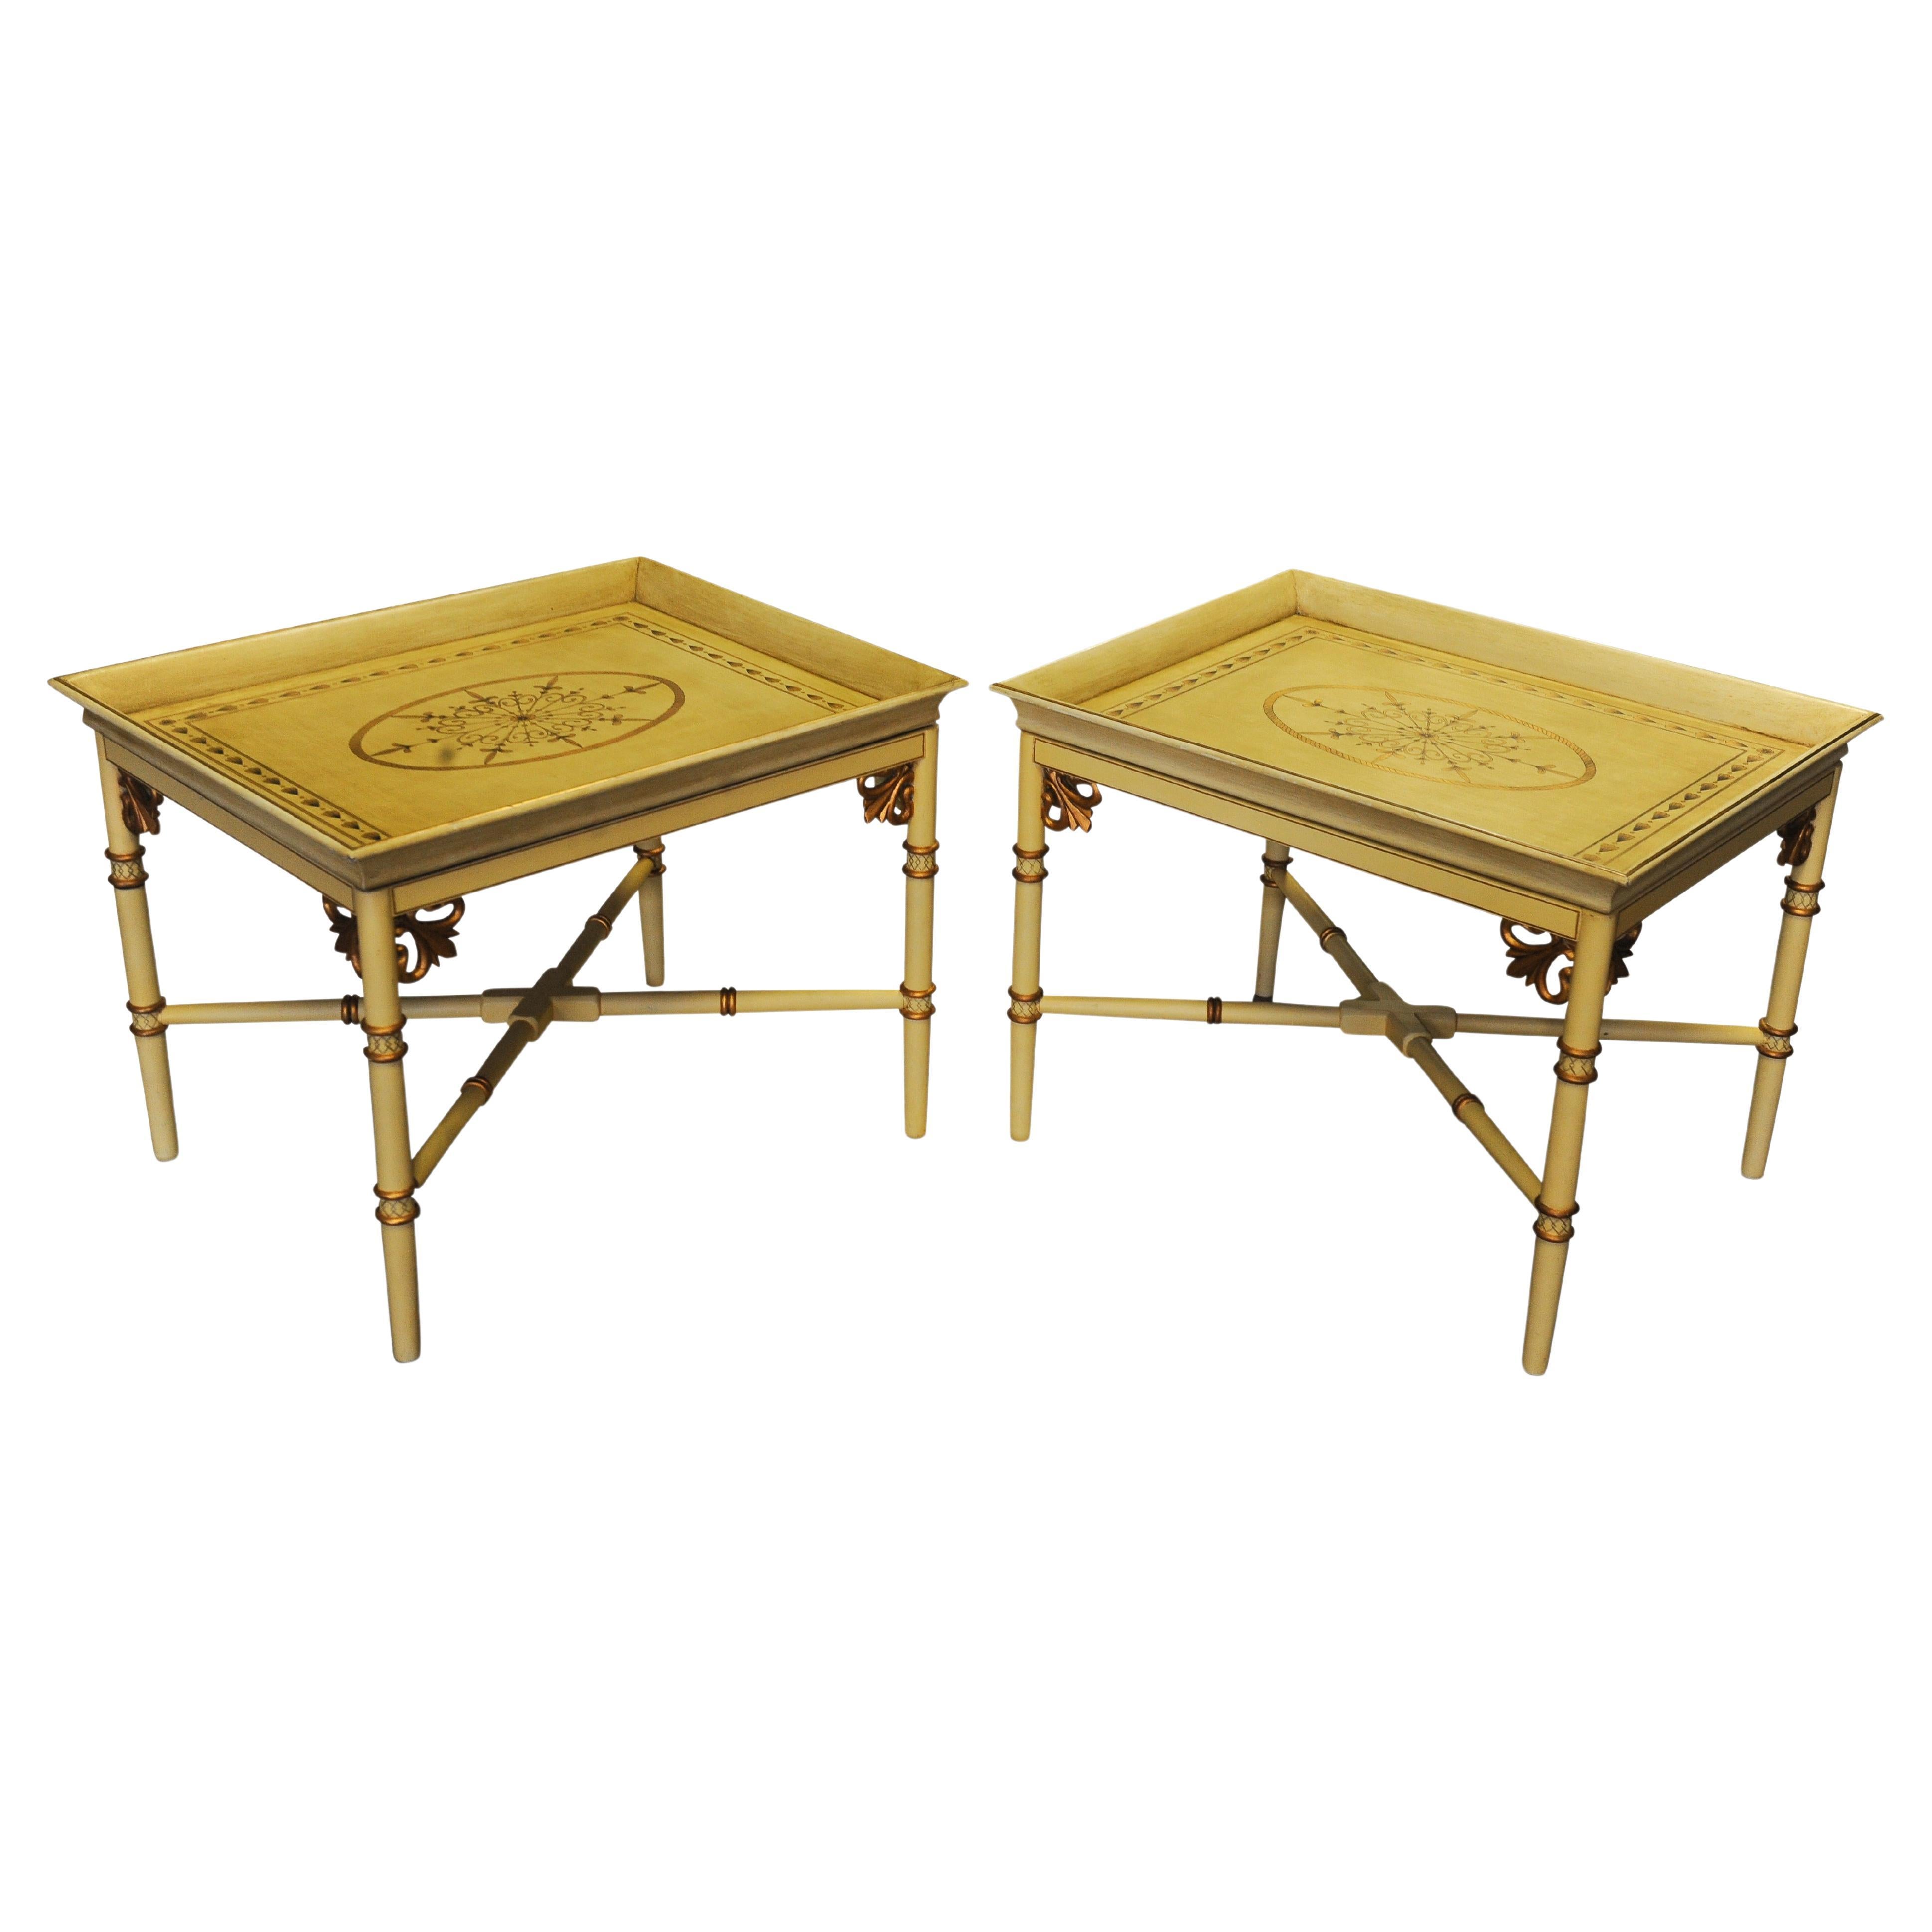 A Pair of Julian Chichester Faux Bamboo Tray Top Side Tables on X-Frame Bases Designed in The Style Of Thomas Chippendale, with A Hint of Campaign.

Julian Chichester has an enviable reputation for contemporary design, inspired by tradition and